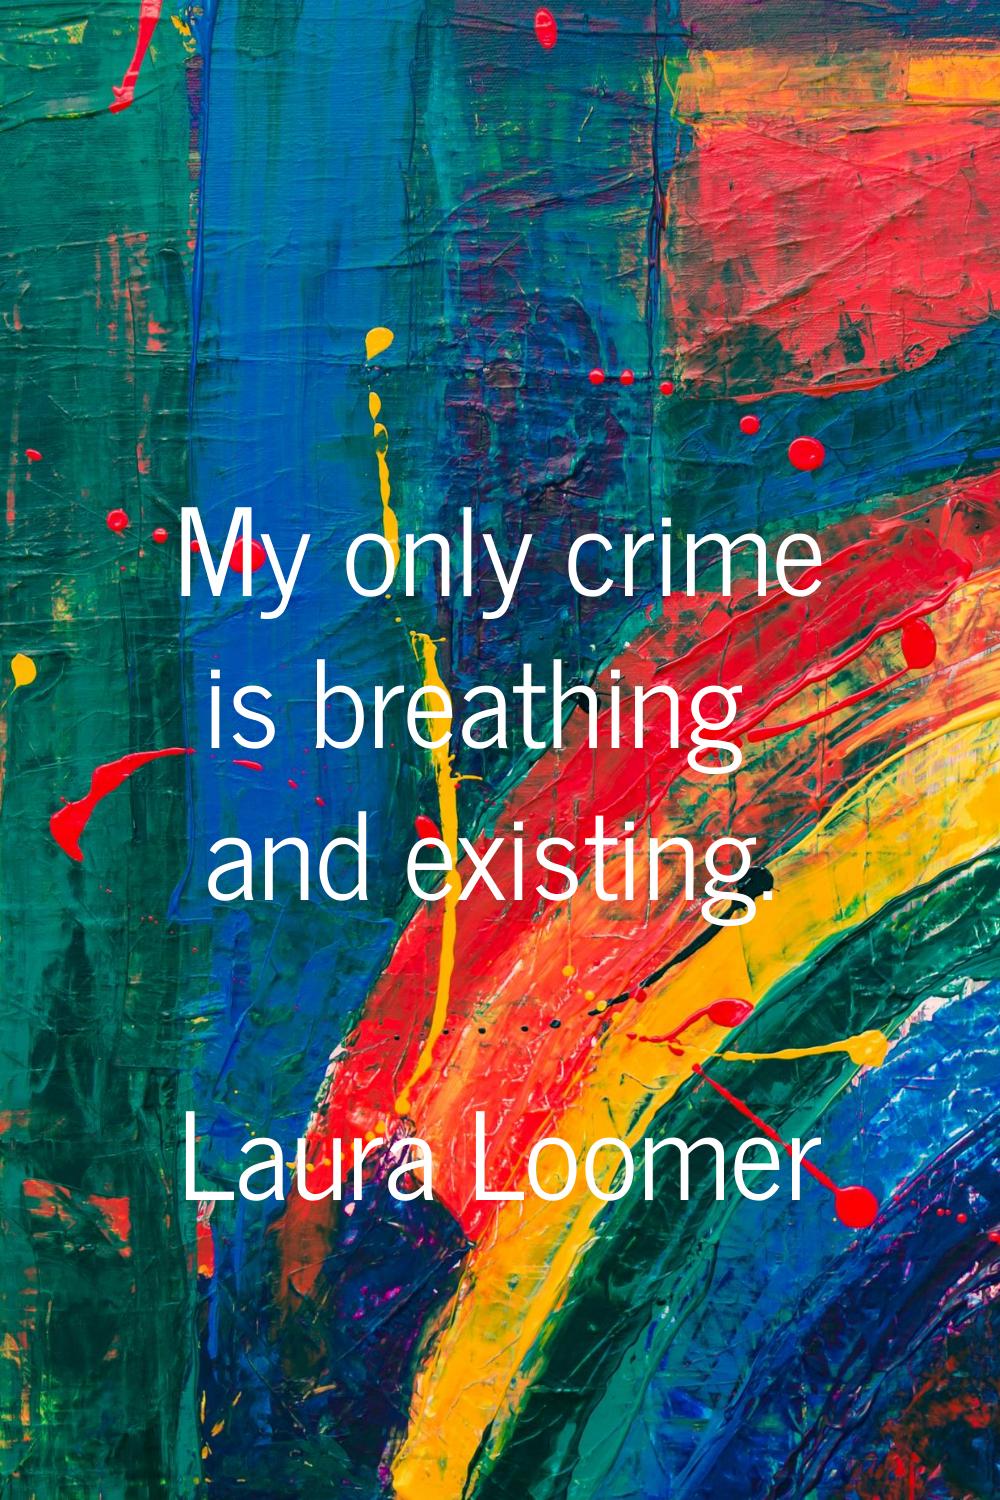 My only crime is breathing and existing.